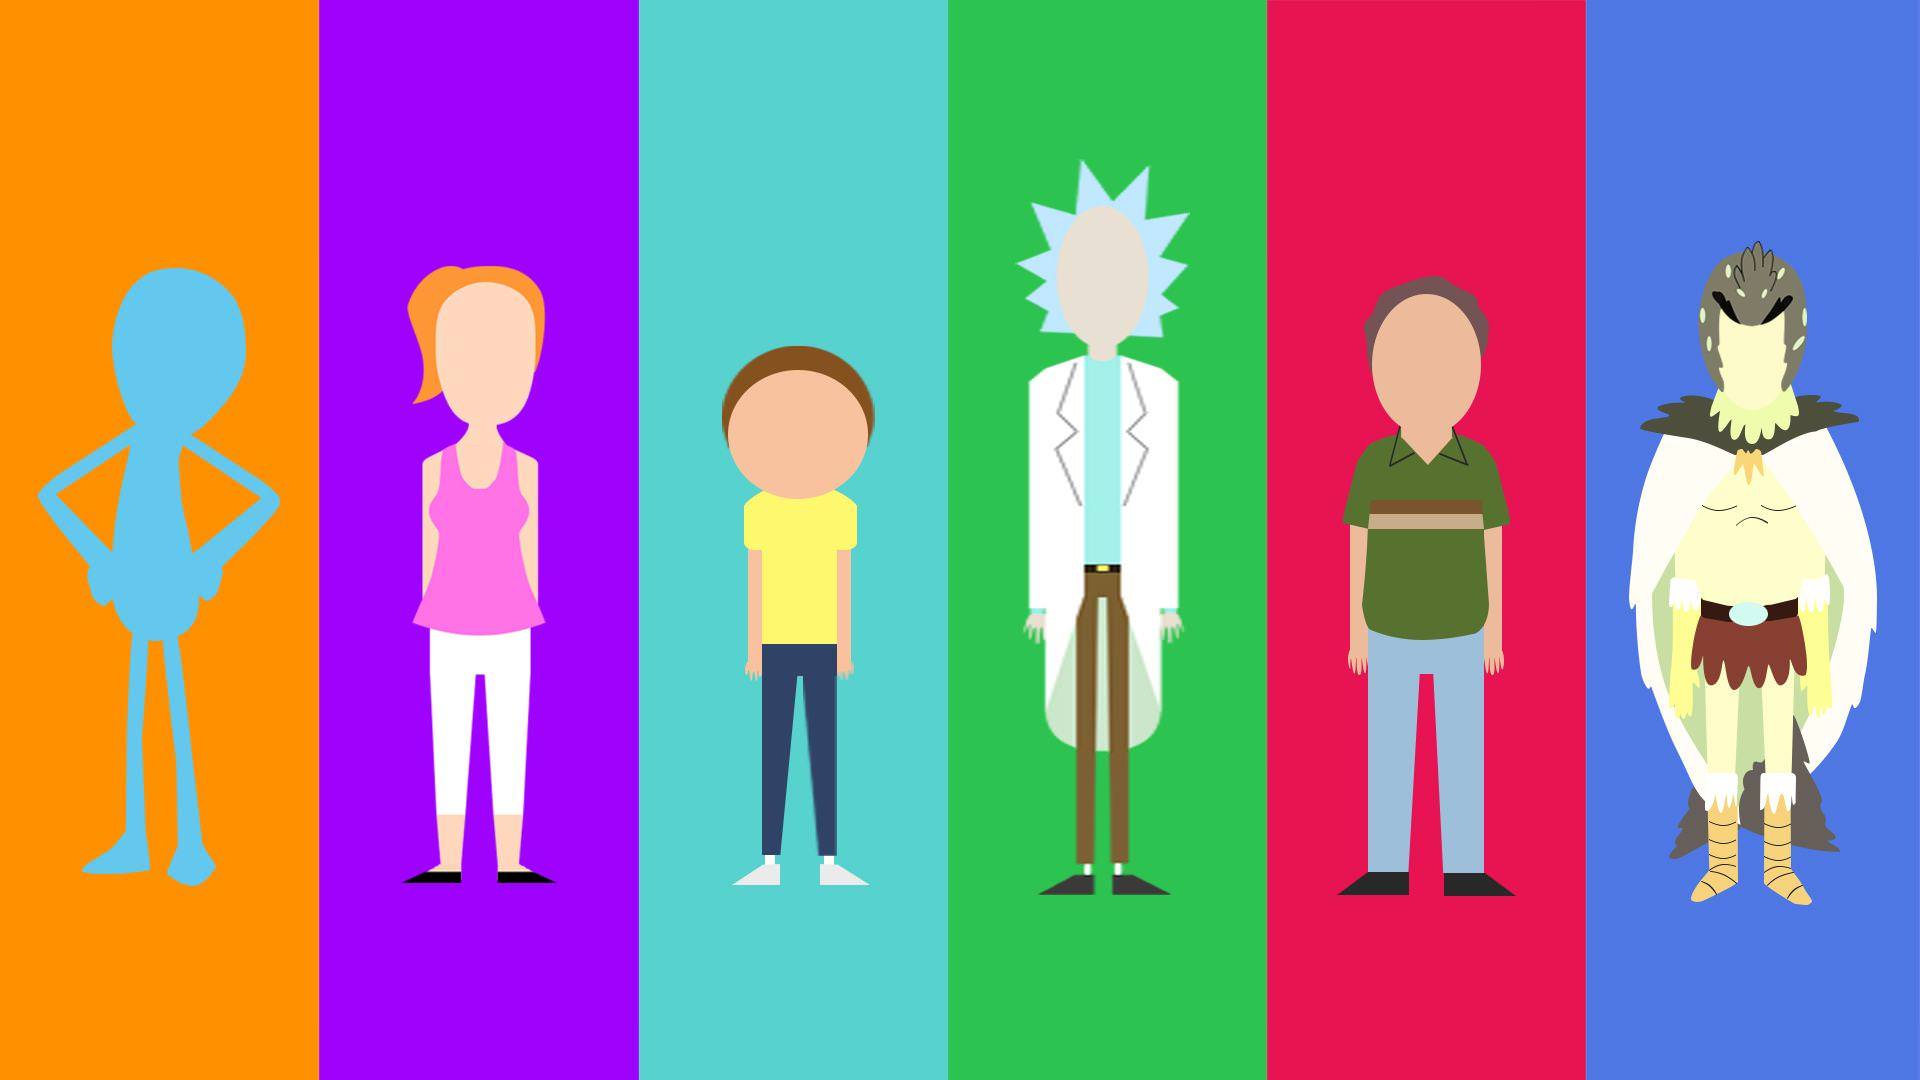 Download Rick And Morty Free Download 1920x1080 Phone 5K HD Wallpaper -  